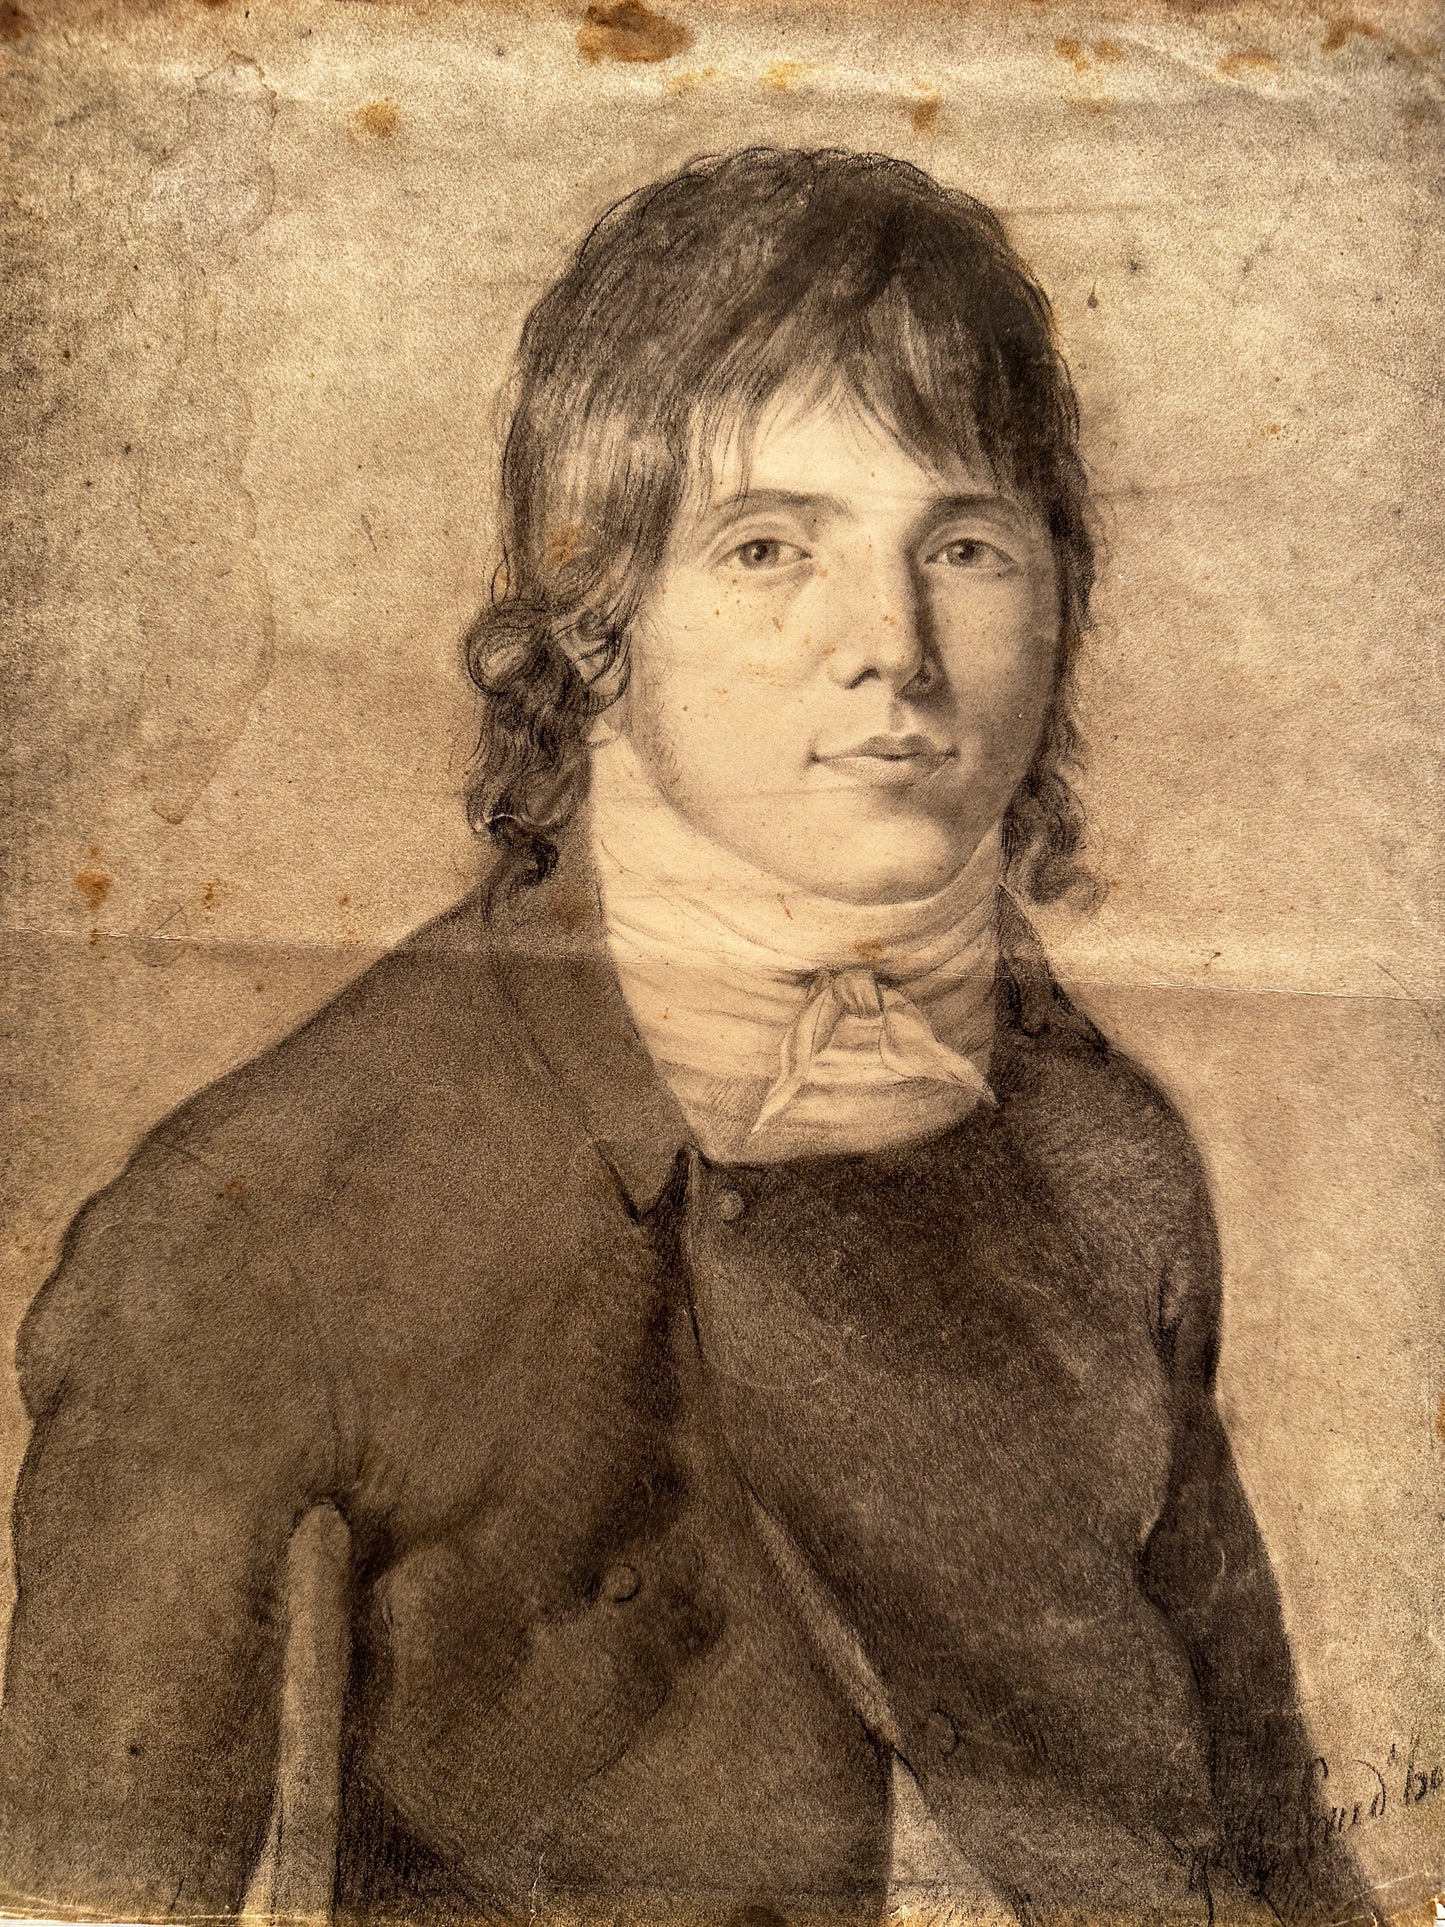 Pierre-Paul Prud'hon Drawing: "Portrait of A Young Man"